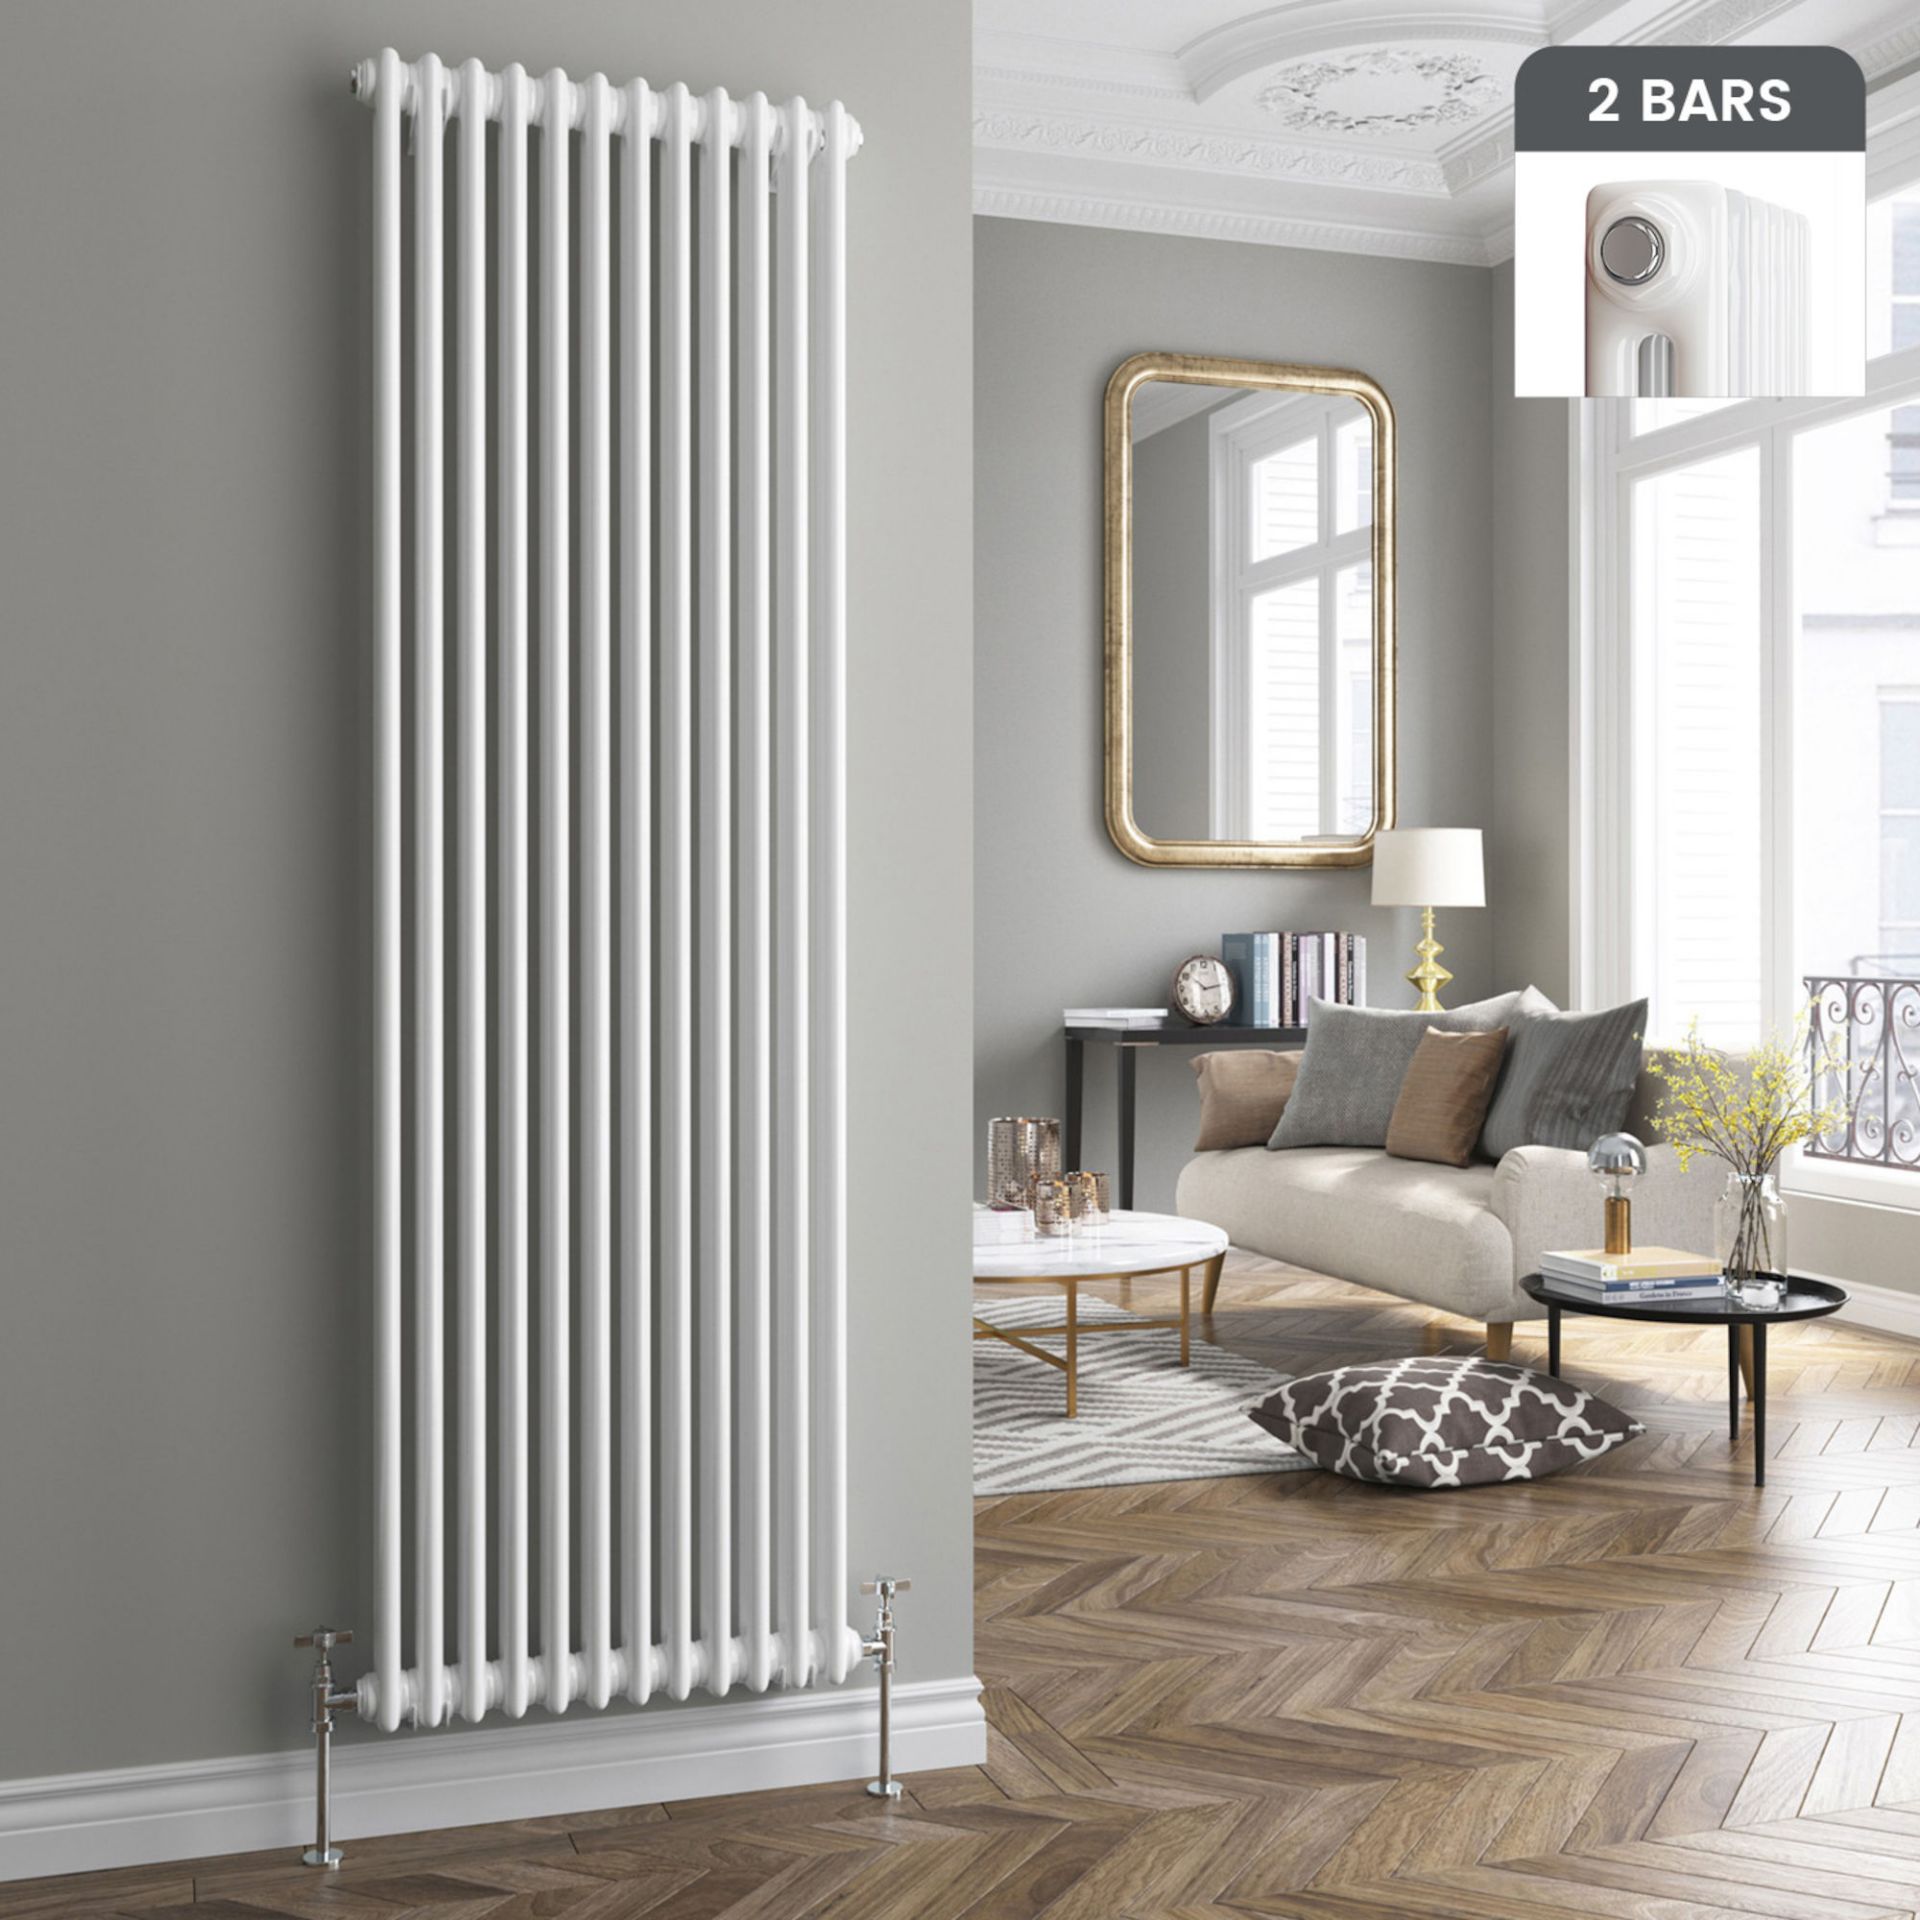 (J48) 2000x490mm White Double Panel Vertical Colosseum Traditional Radiator. RRP £519.99. For ...